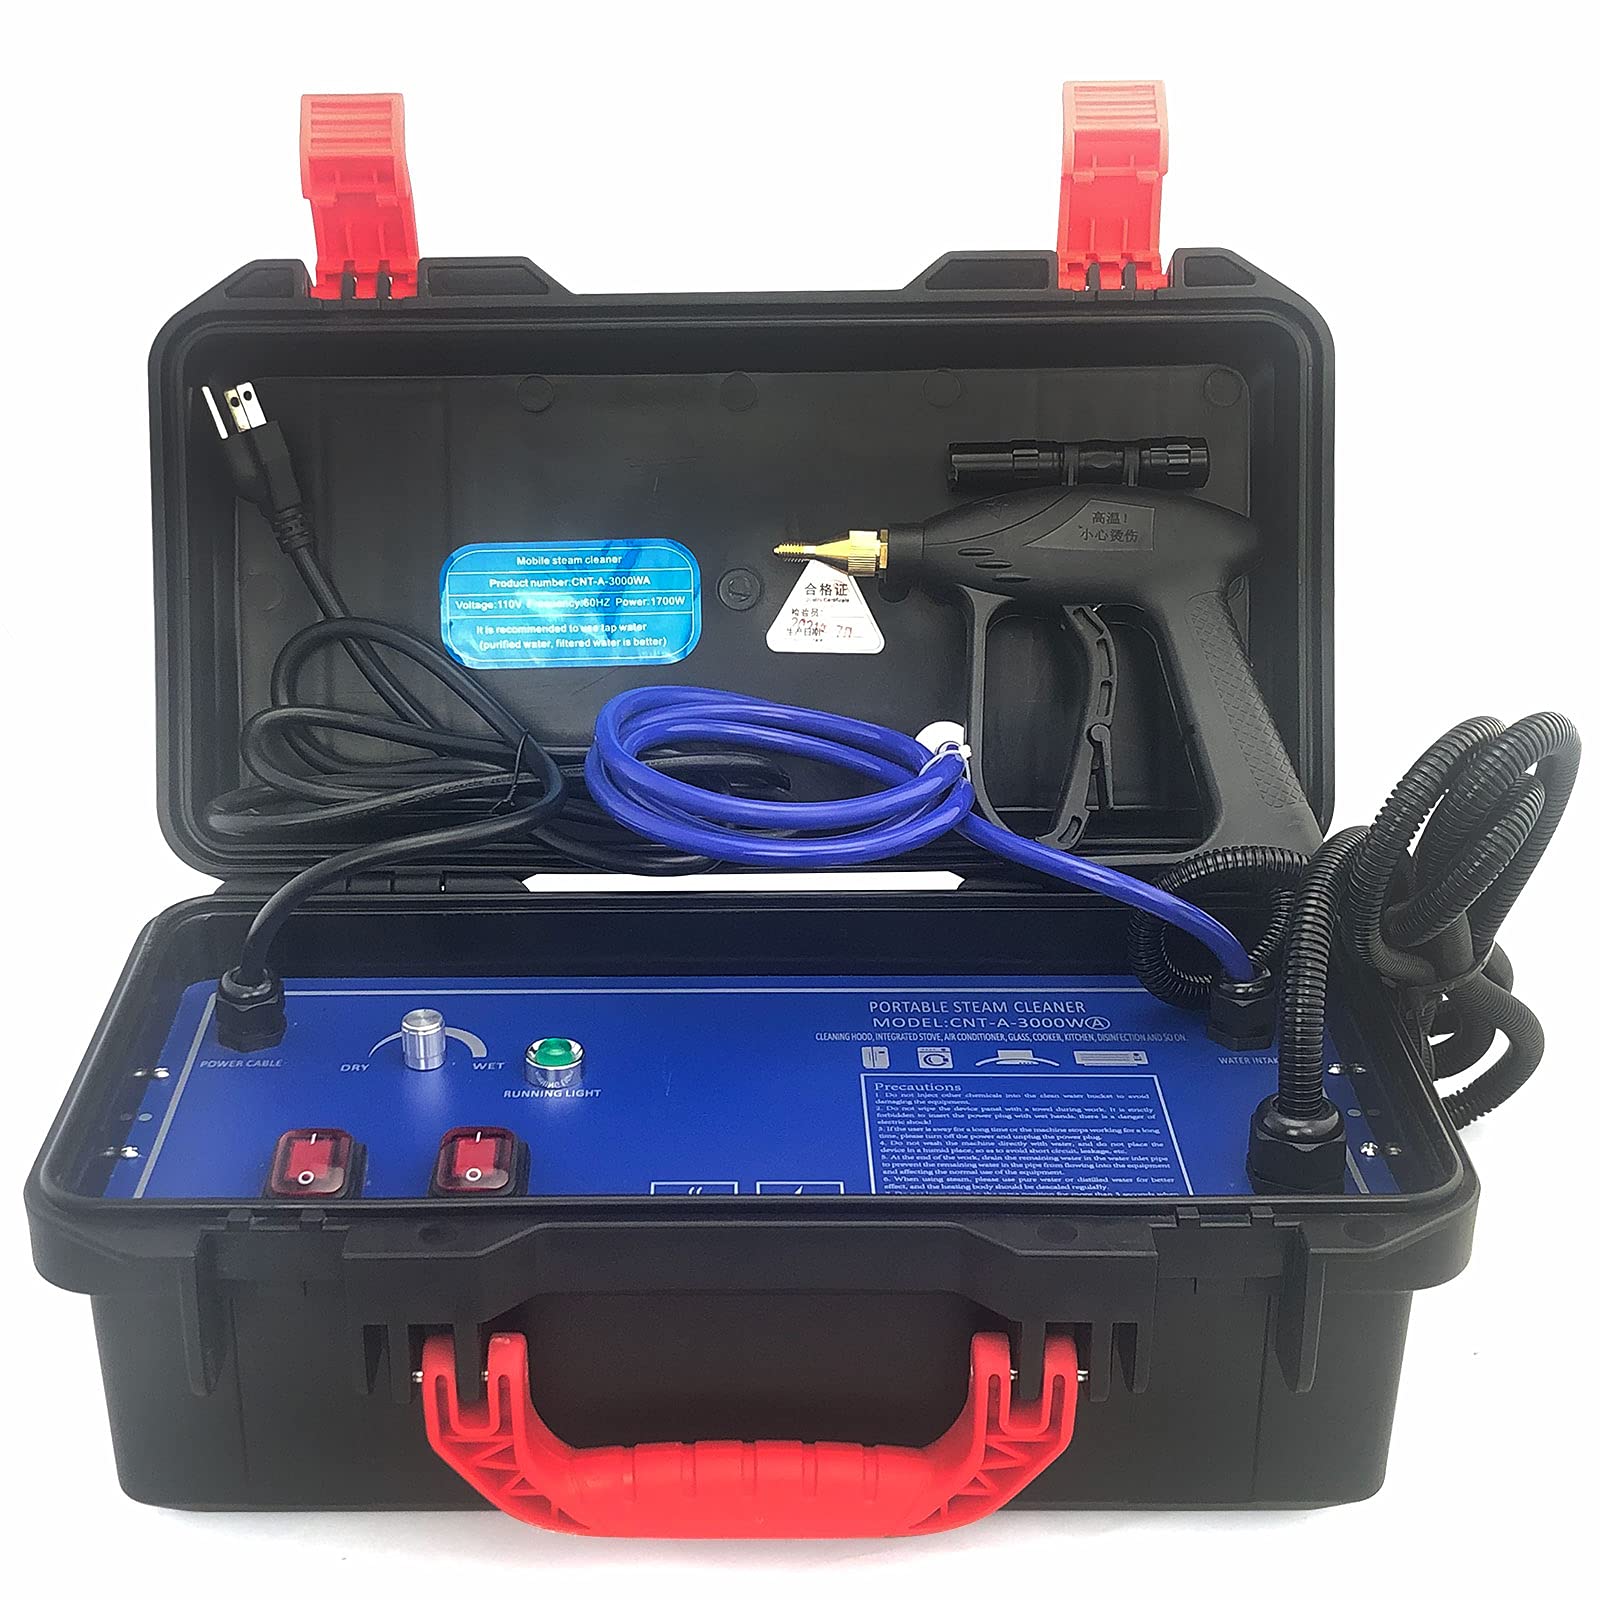 High Pressure Steam Cleaner Mobile Cleaning Machine